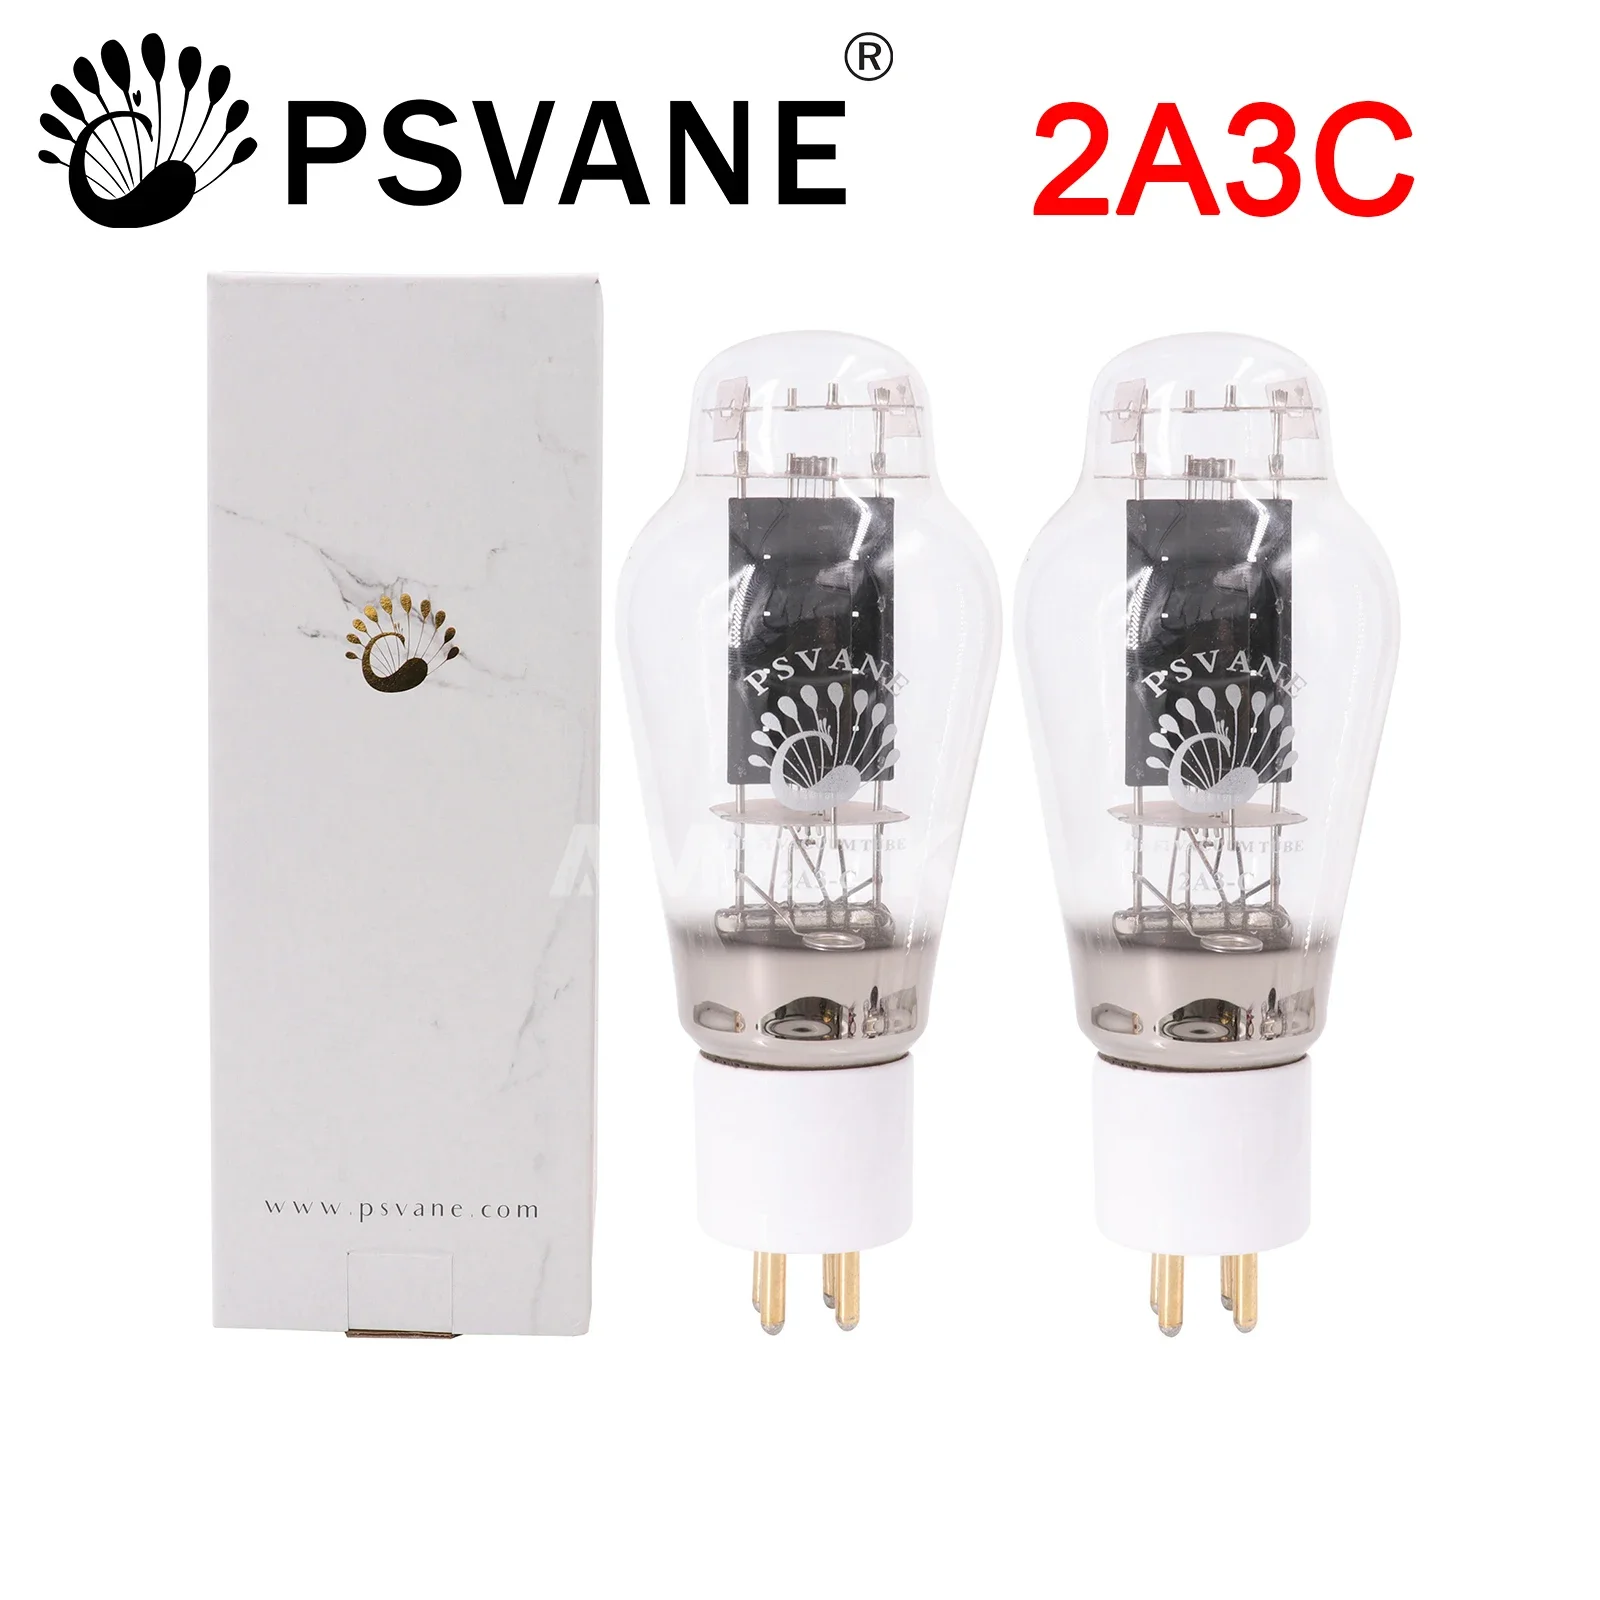 

PSVANE 2A3C Vacuum Tube Replace 2A3 2A3B Carbon Plate Vintage HIFI AUDIO TUBE AMP Upgrade DIY GD-PARTS New Matched Pair